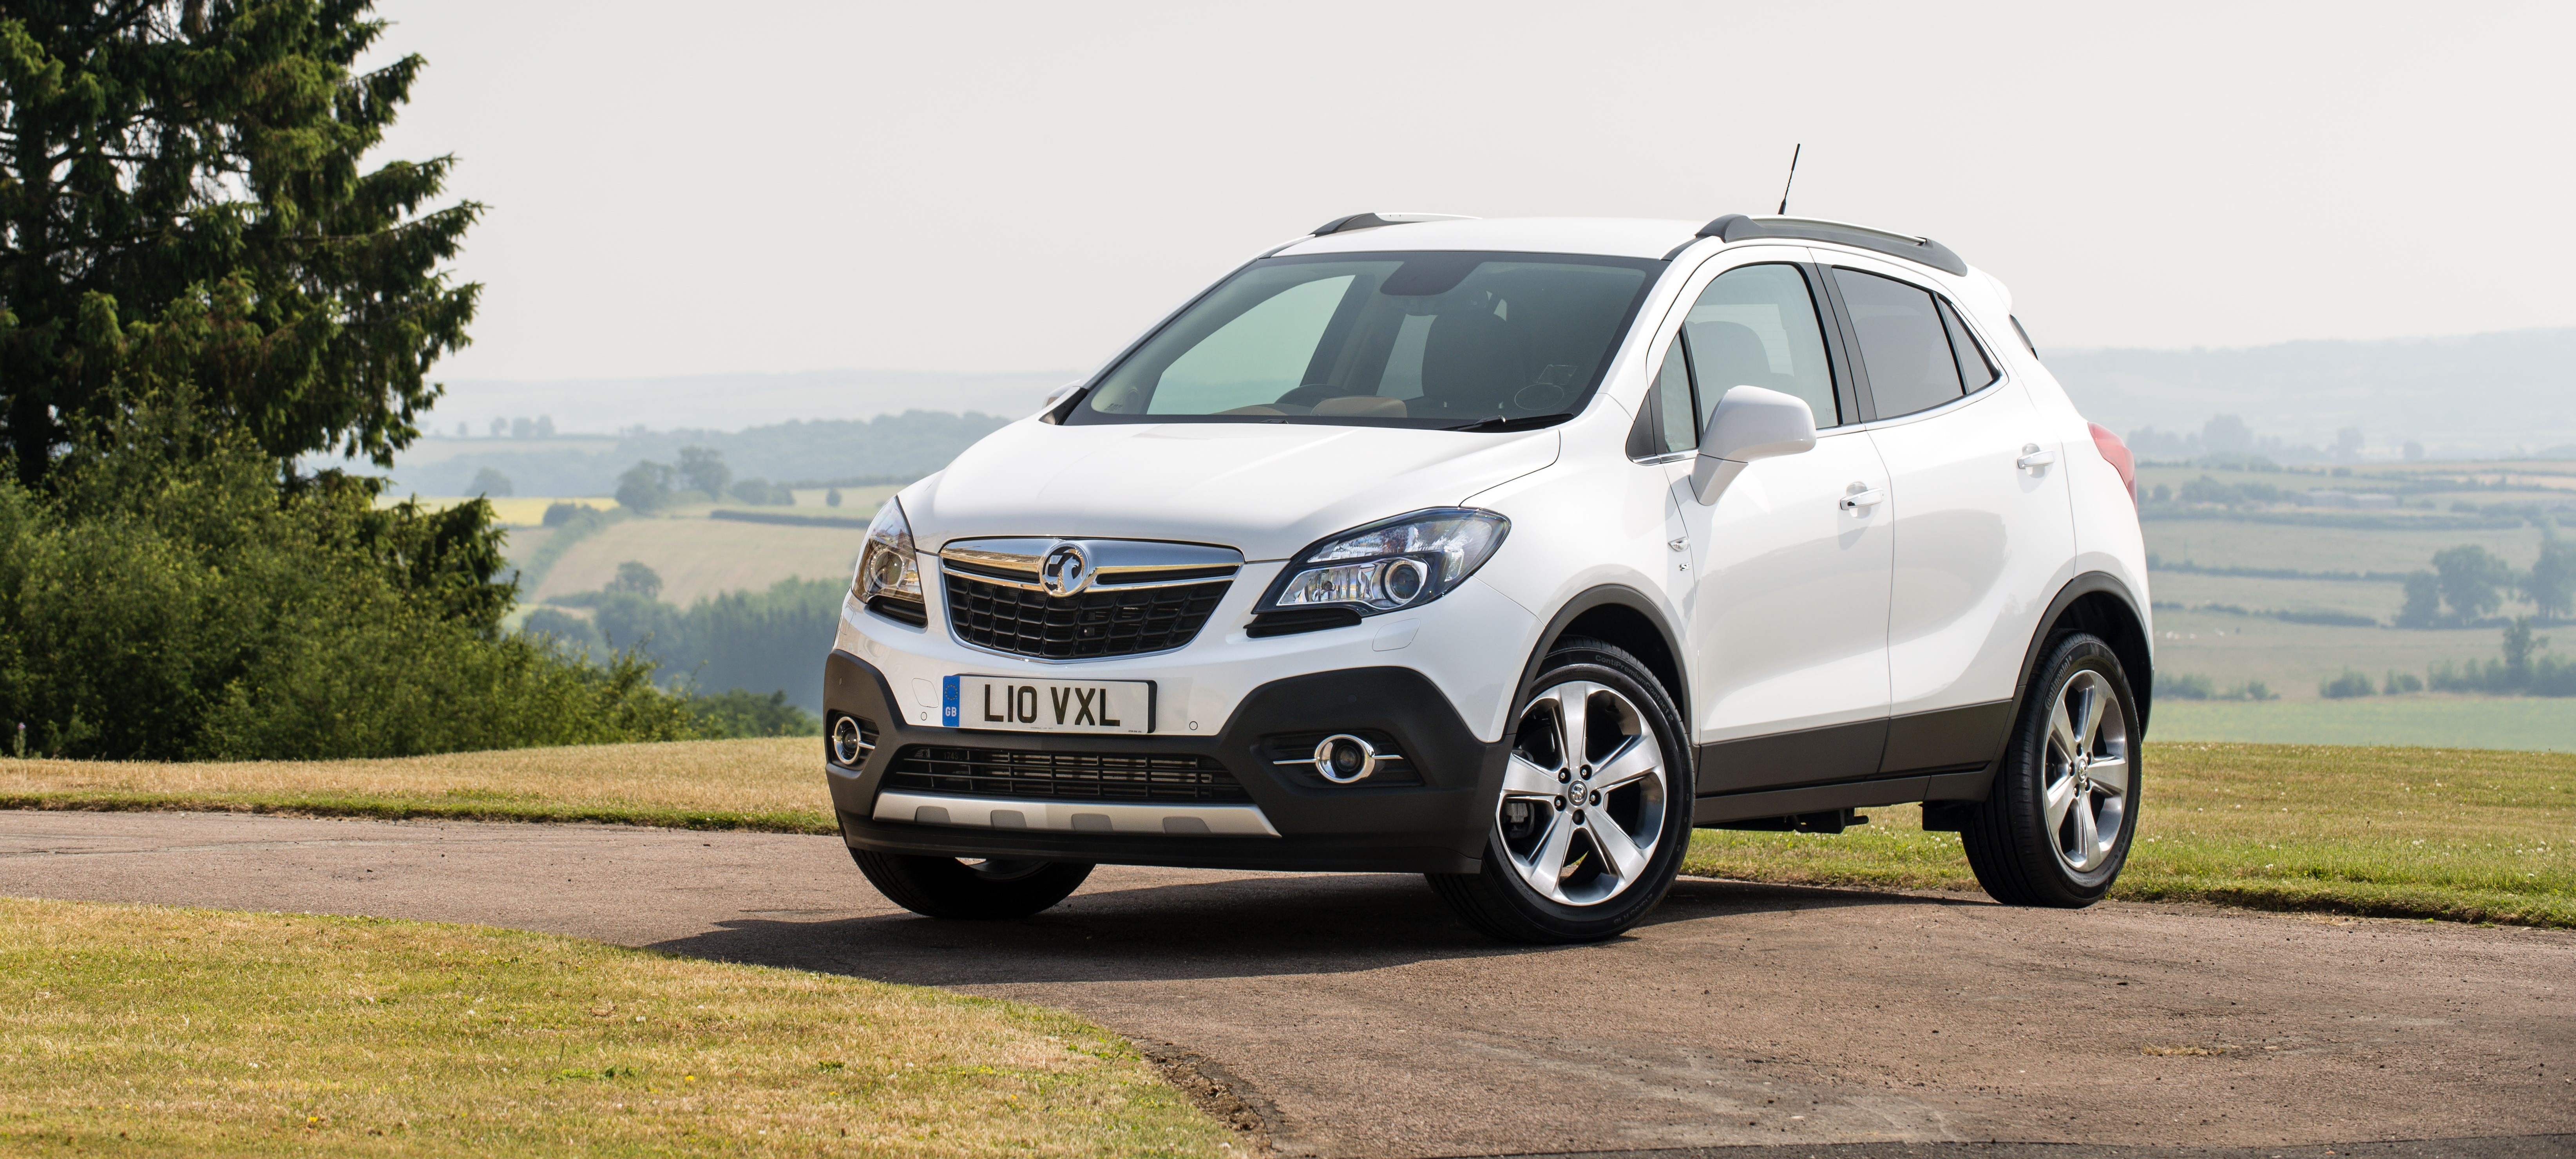 Vauxhall Mokka Sizes And Dimensions Guide Carwow